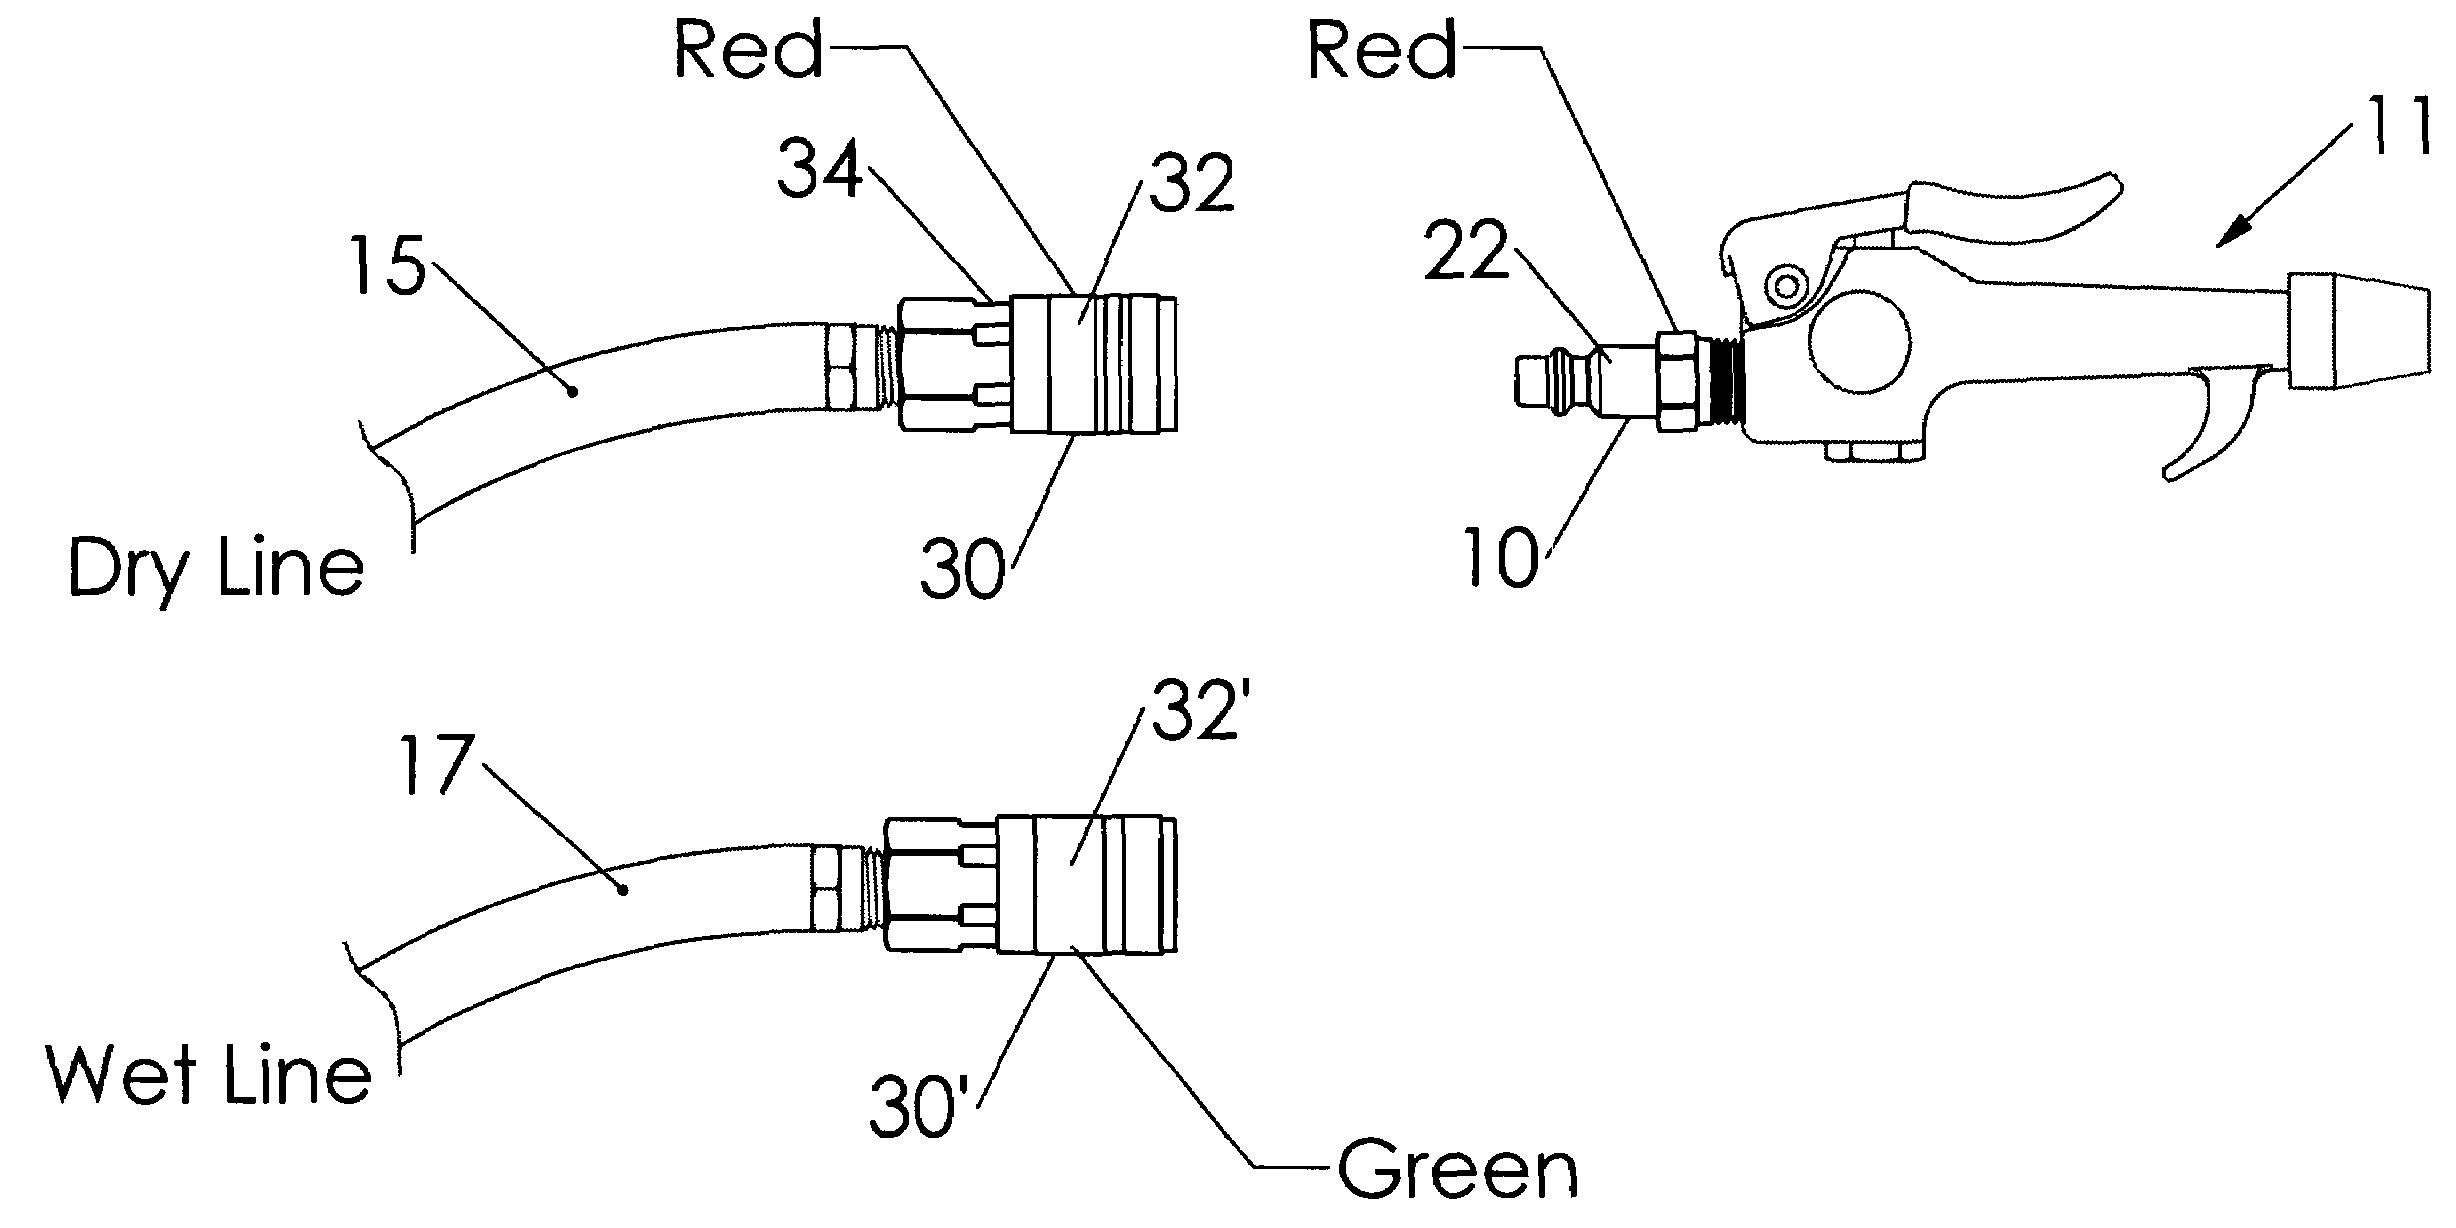 Identification system for pneumatic couplers